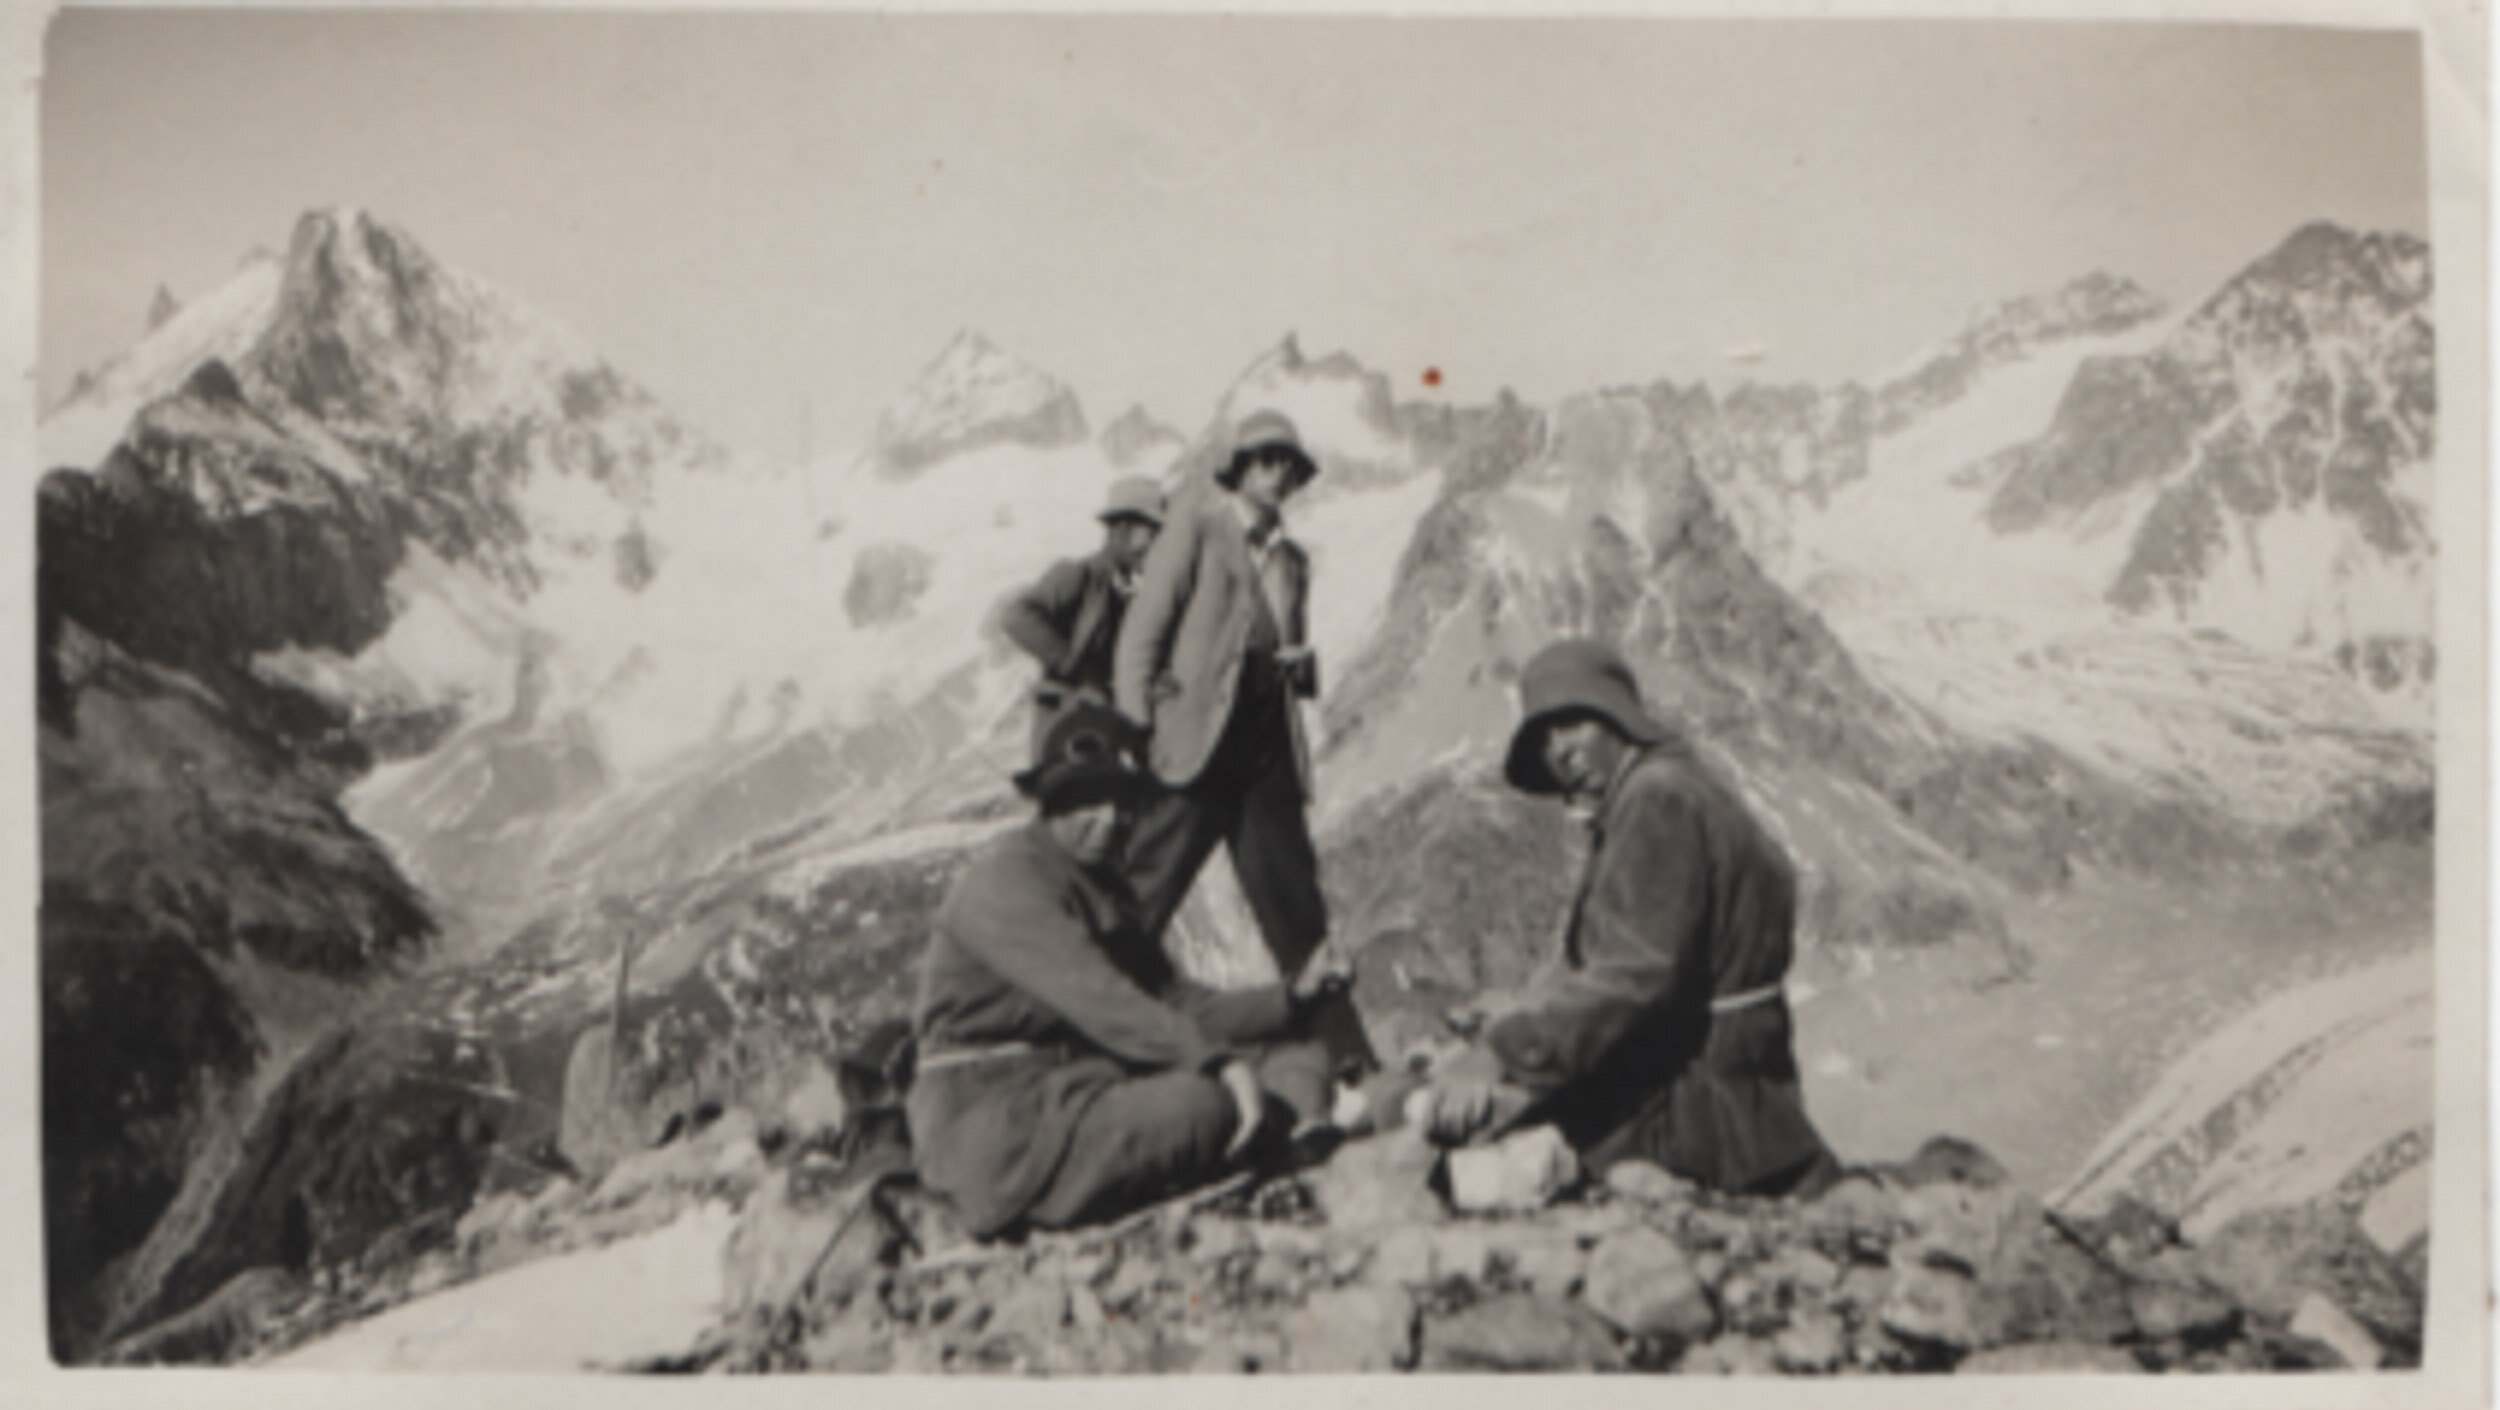 Marjory Heys-Jones and others in the Swiss Alps, 1950s